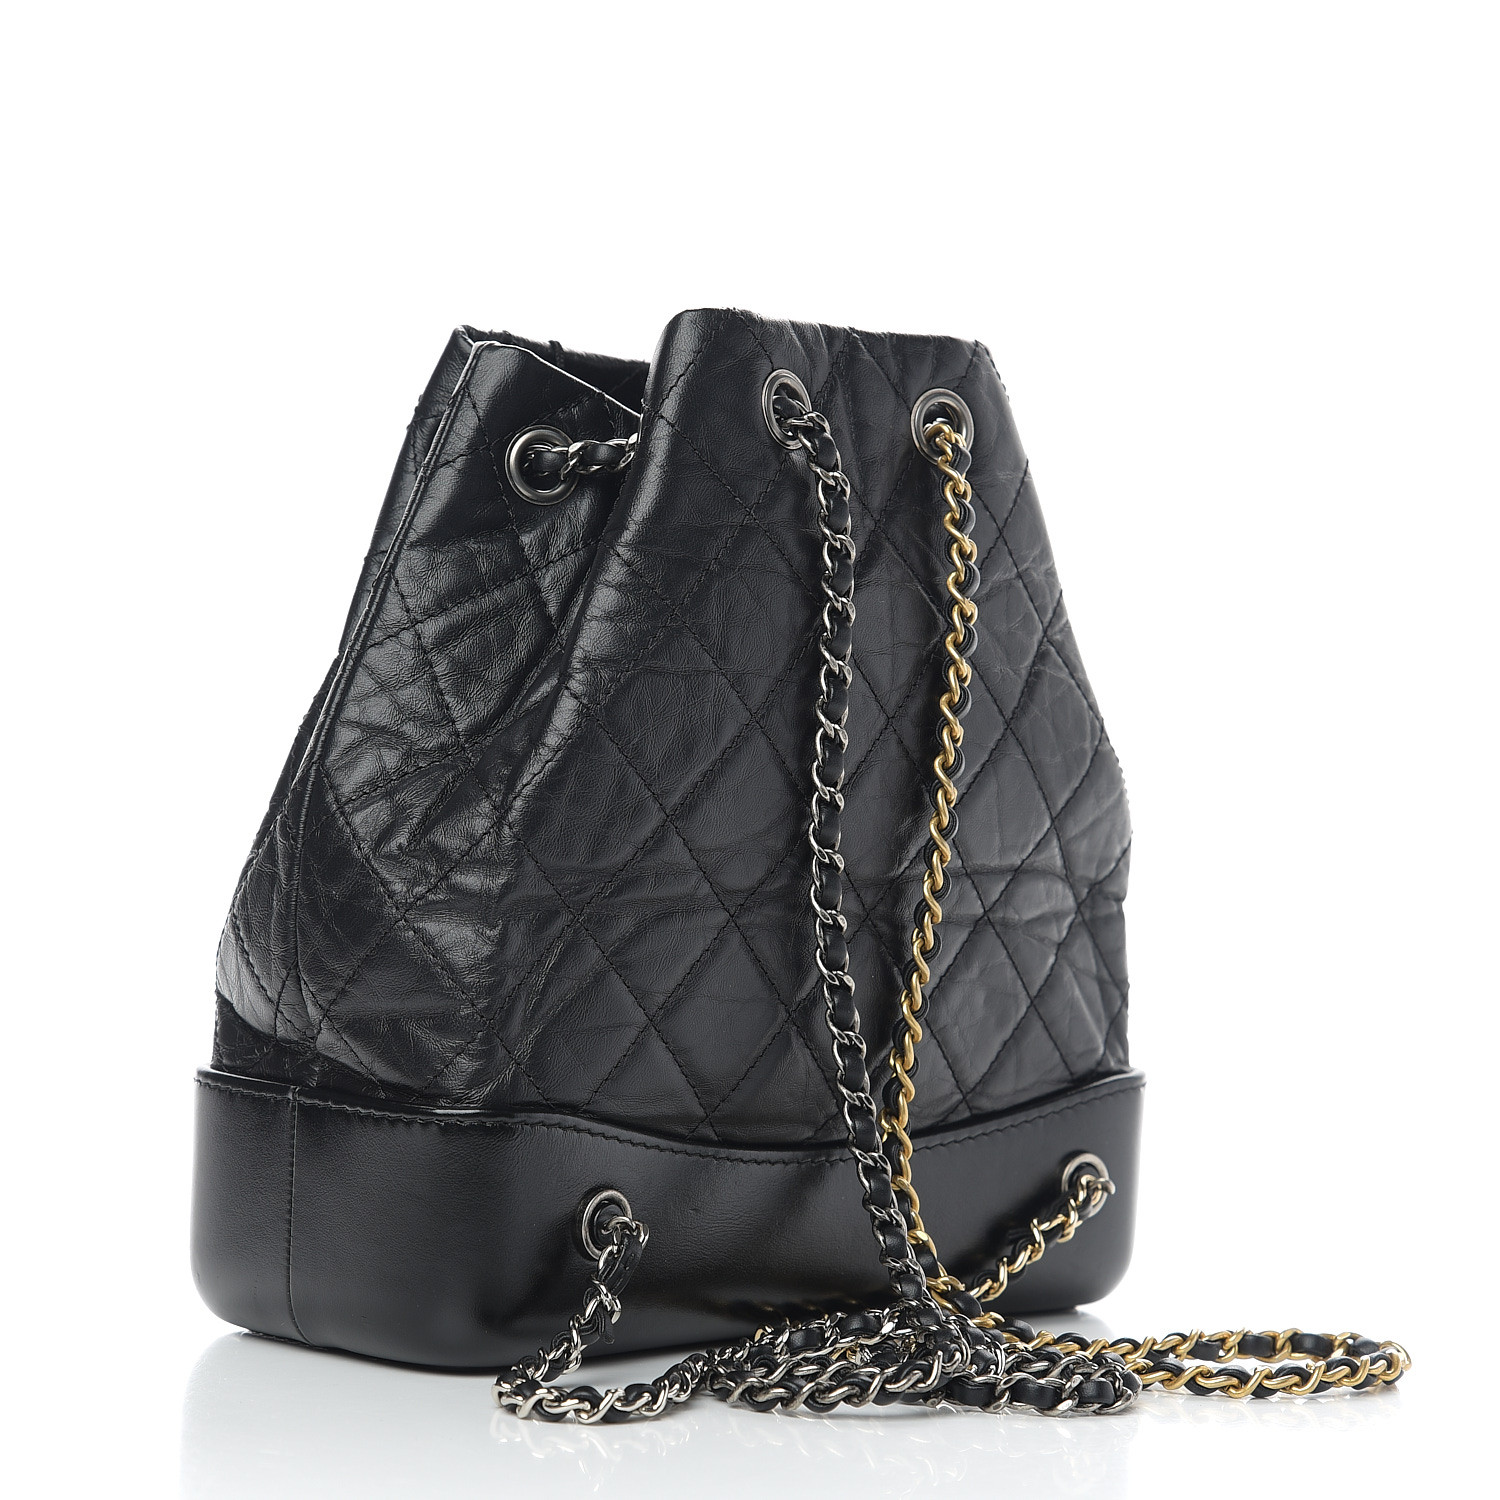 CHANEL Aged Calfskin Quilted Small Gabrielle Backpack Black 567254